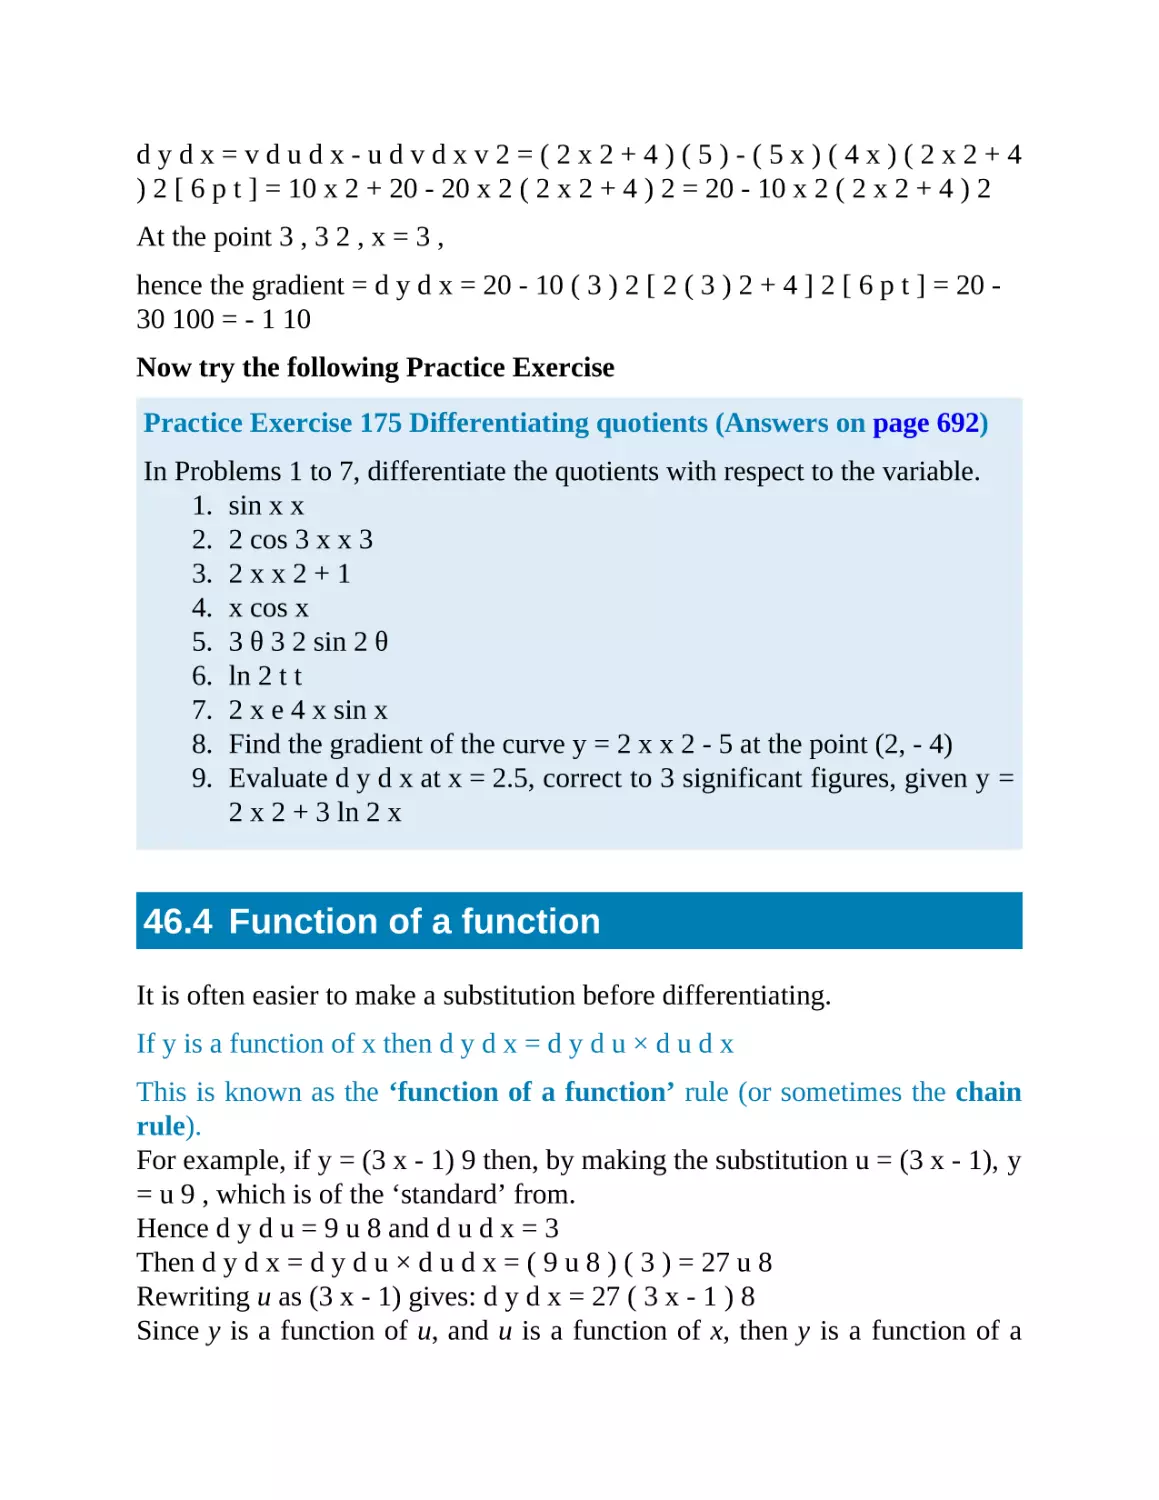 46.4 Function of a function